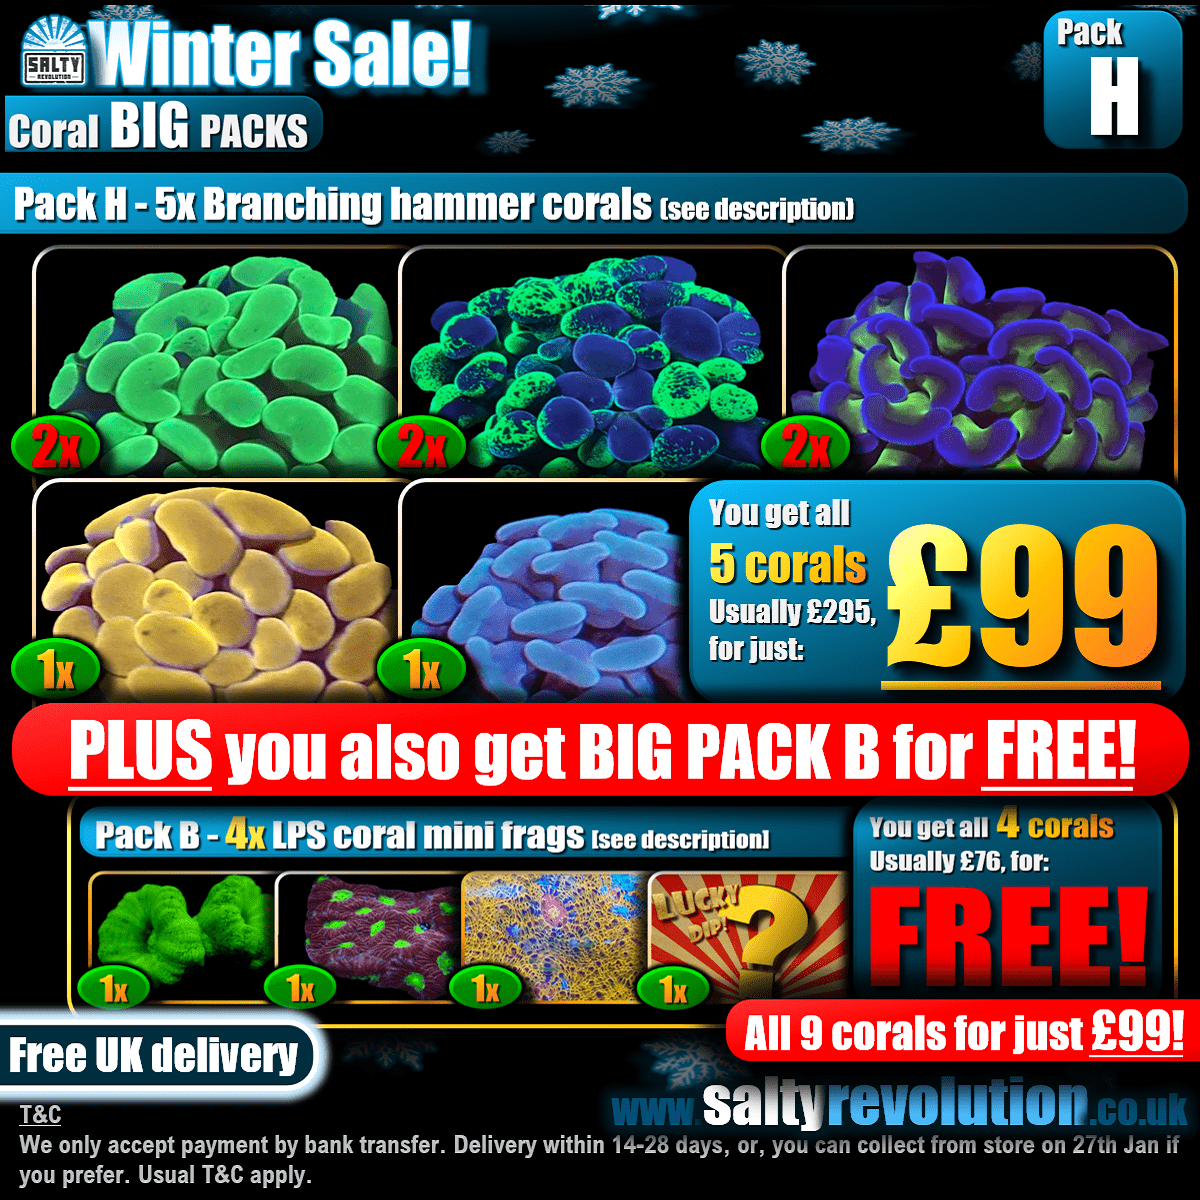 Winter Sale - BIG PACKS - Pack H - £99 - Only 4 of these packs available!